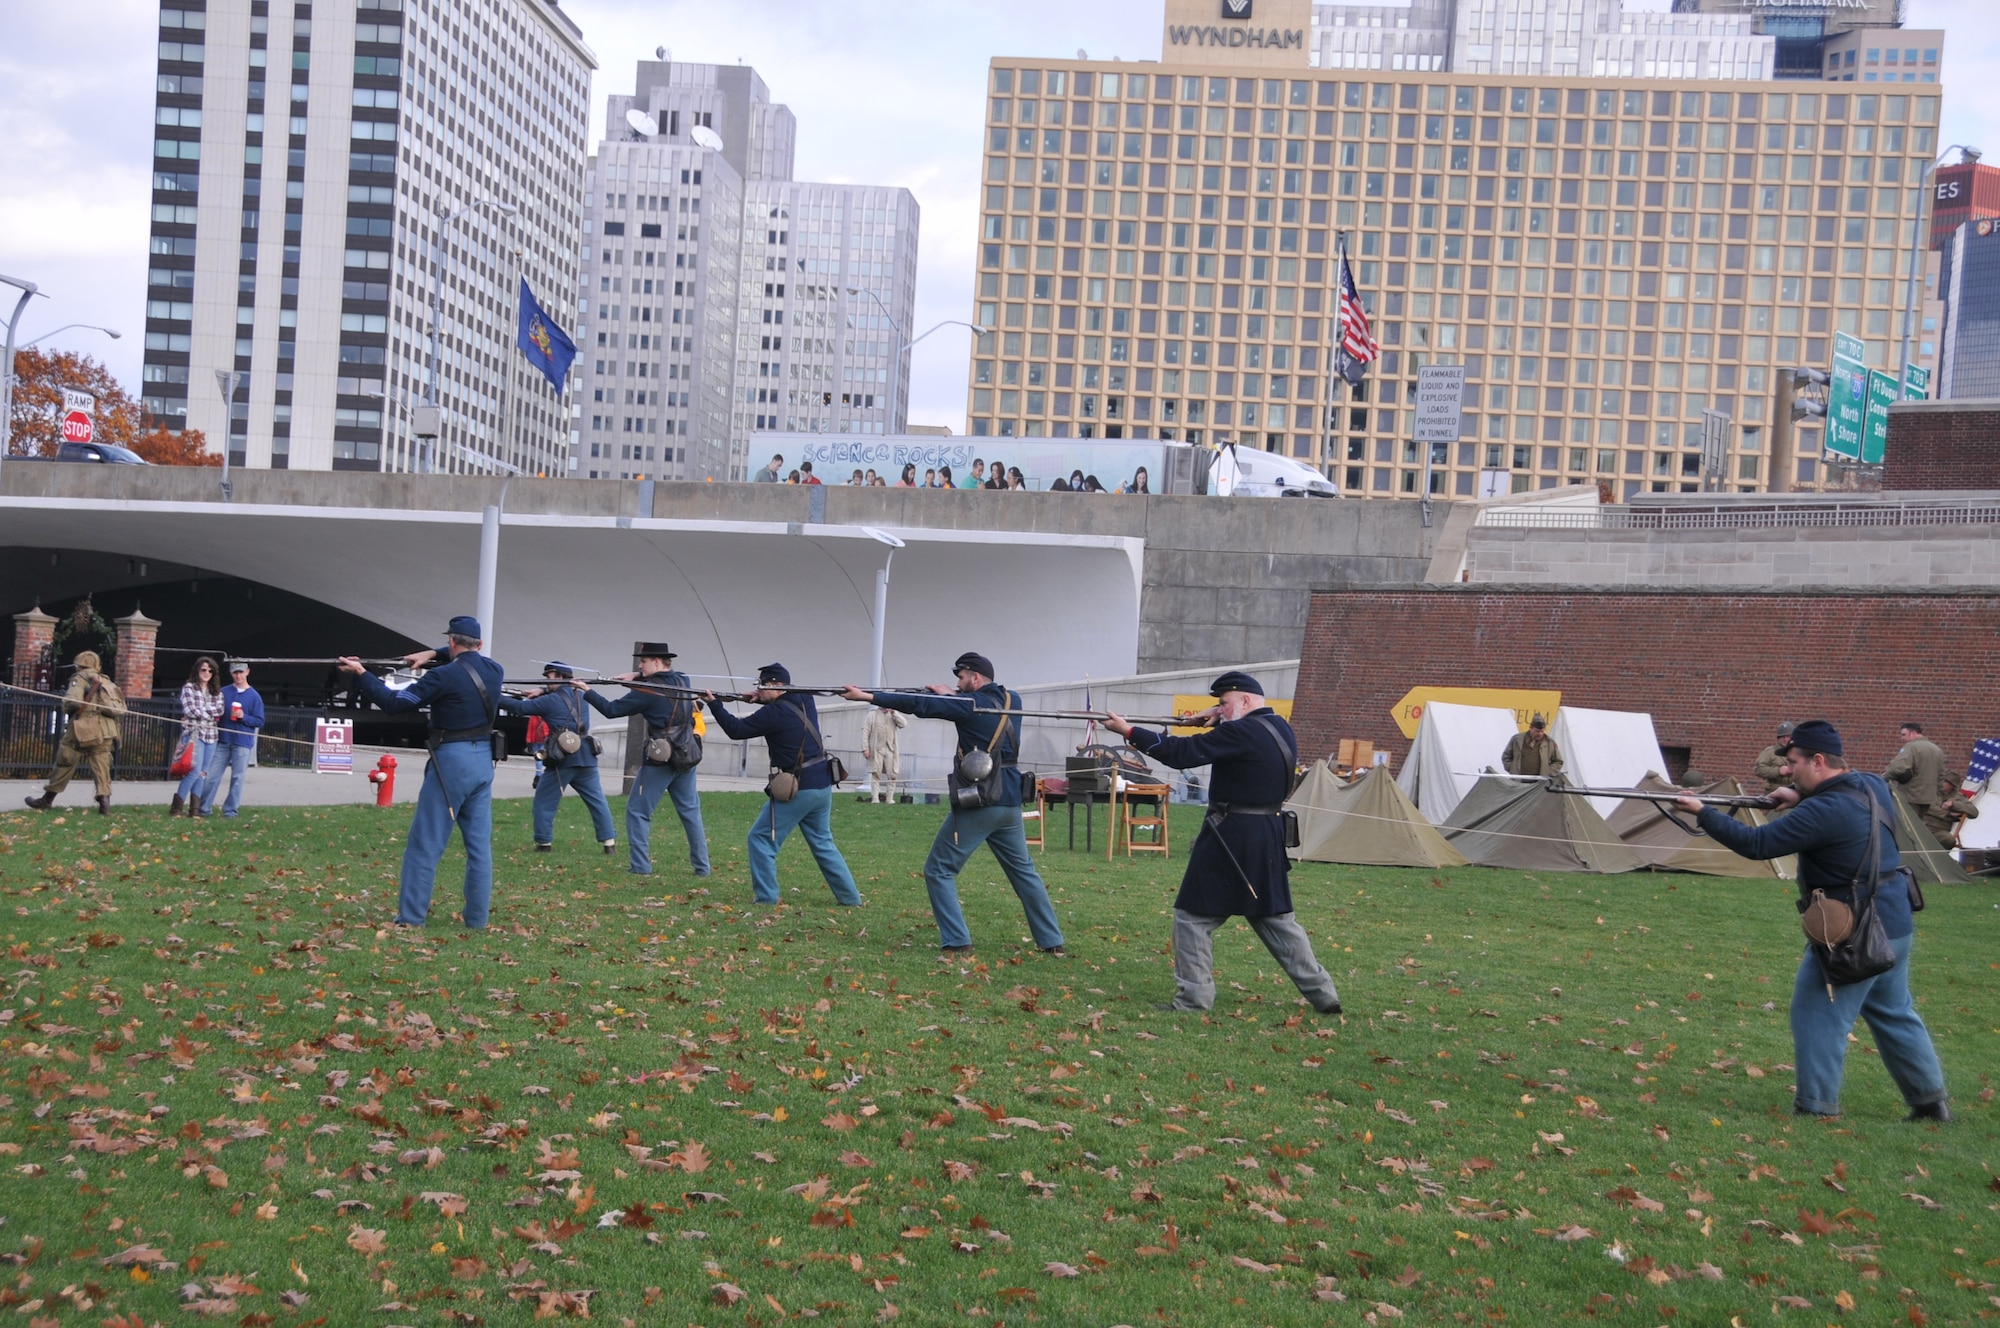 Reenactors from the Civil War fire their weapons. The Pennsylvania National Guard joined with the Pennsylvania Department of Conservation of Natural Resources' Point State Park and the Association of the United States Army to organize Steel City Salutes the Troops, Pittsburgh, Nov. 7, 2015.  (U.S. Air National Guard Photo by Staff Sgt. Ryan Conley)